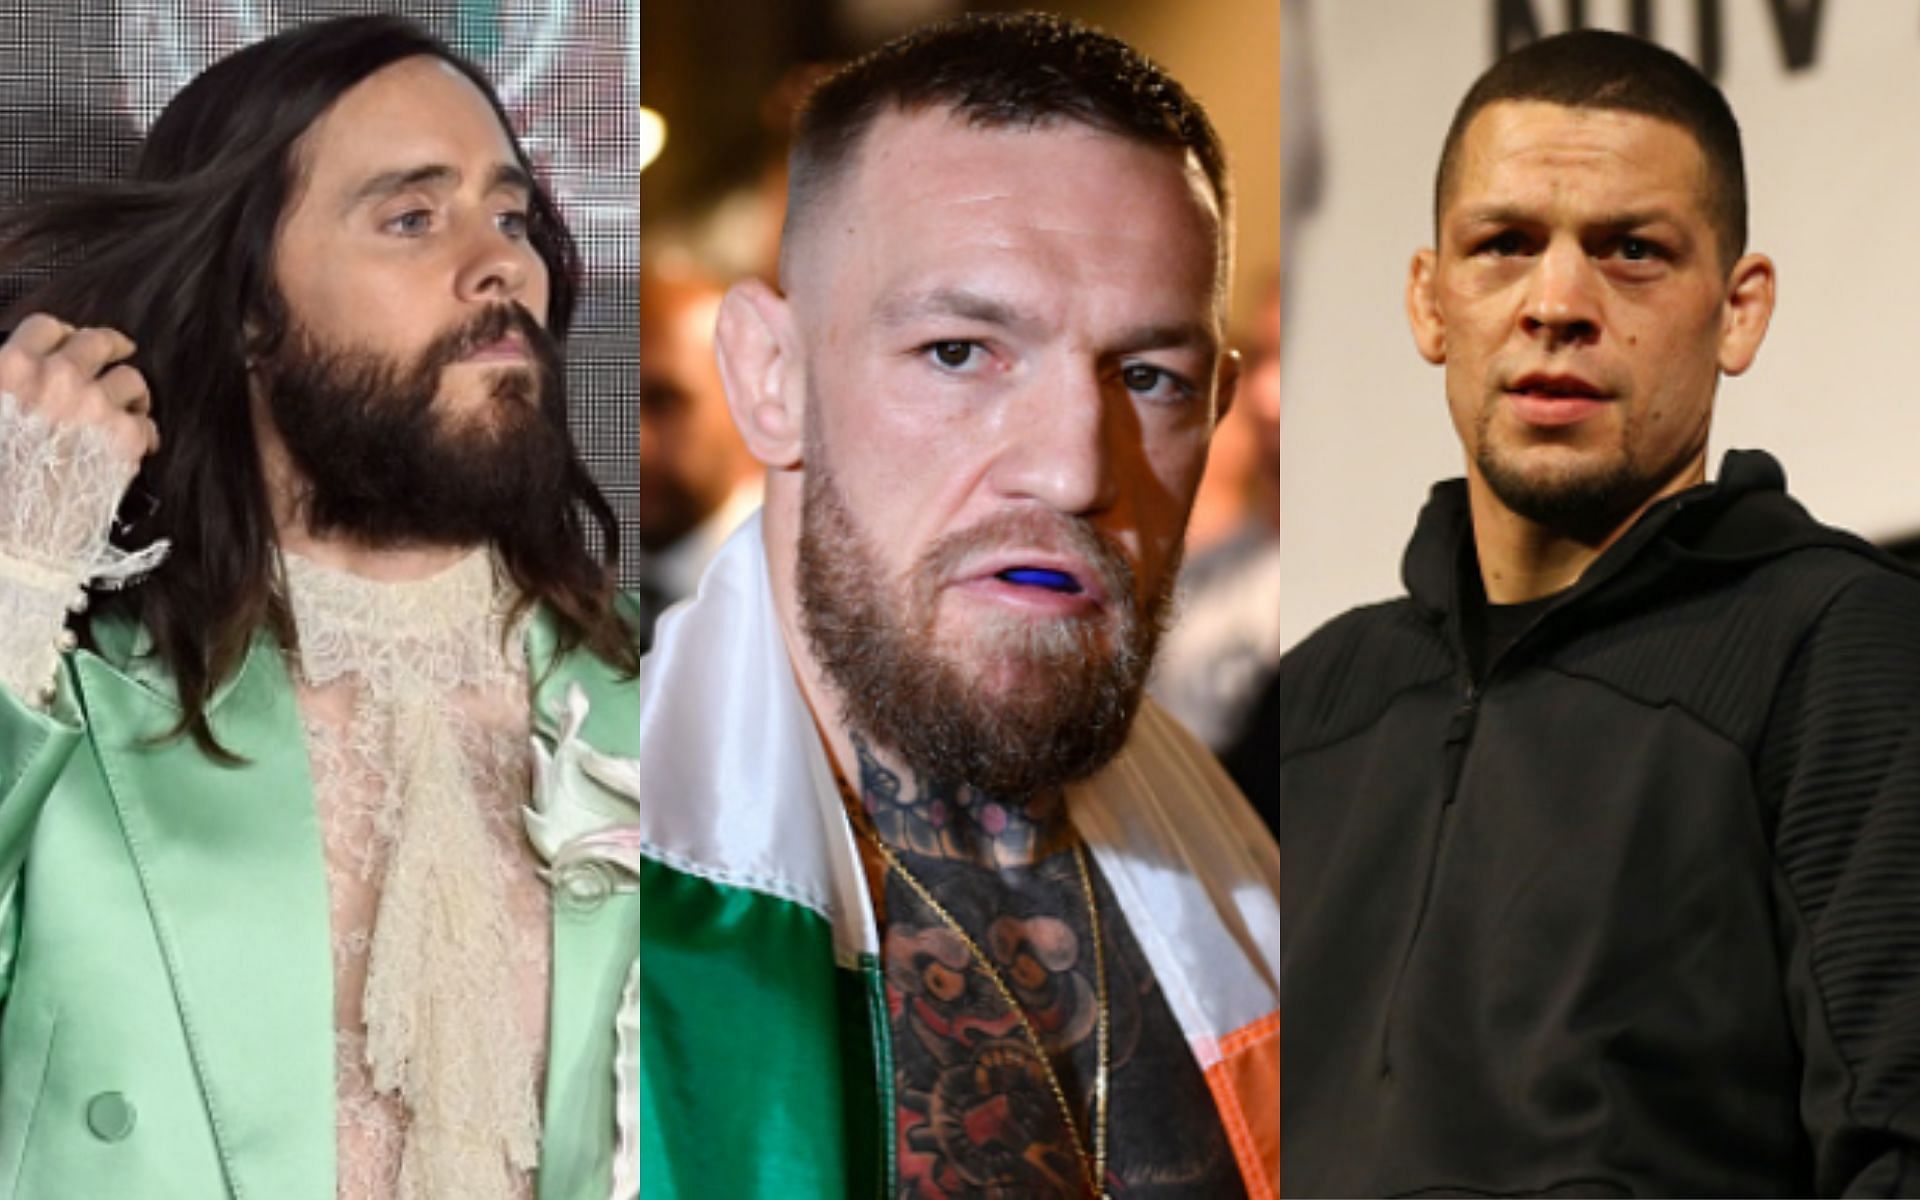 Conor McGregor and Nate Diaz go back-and-forth on potential movie future
